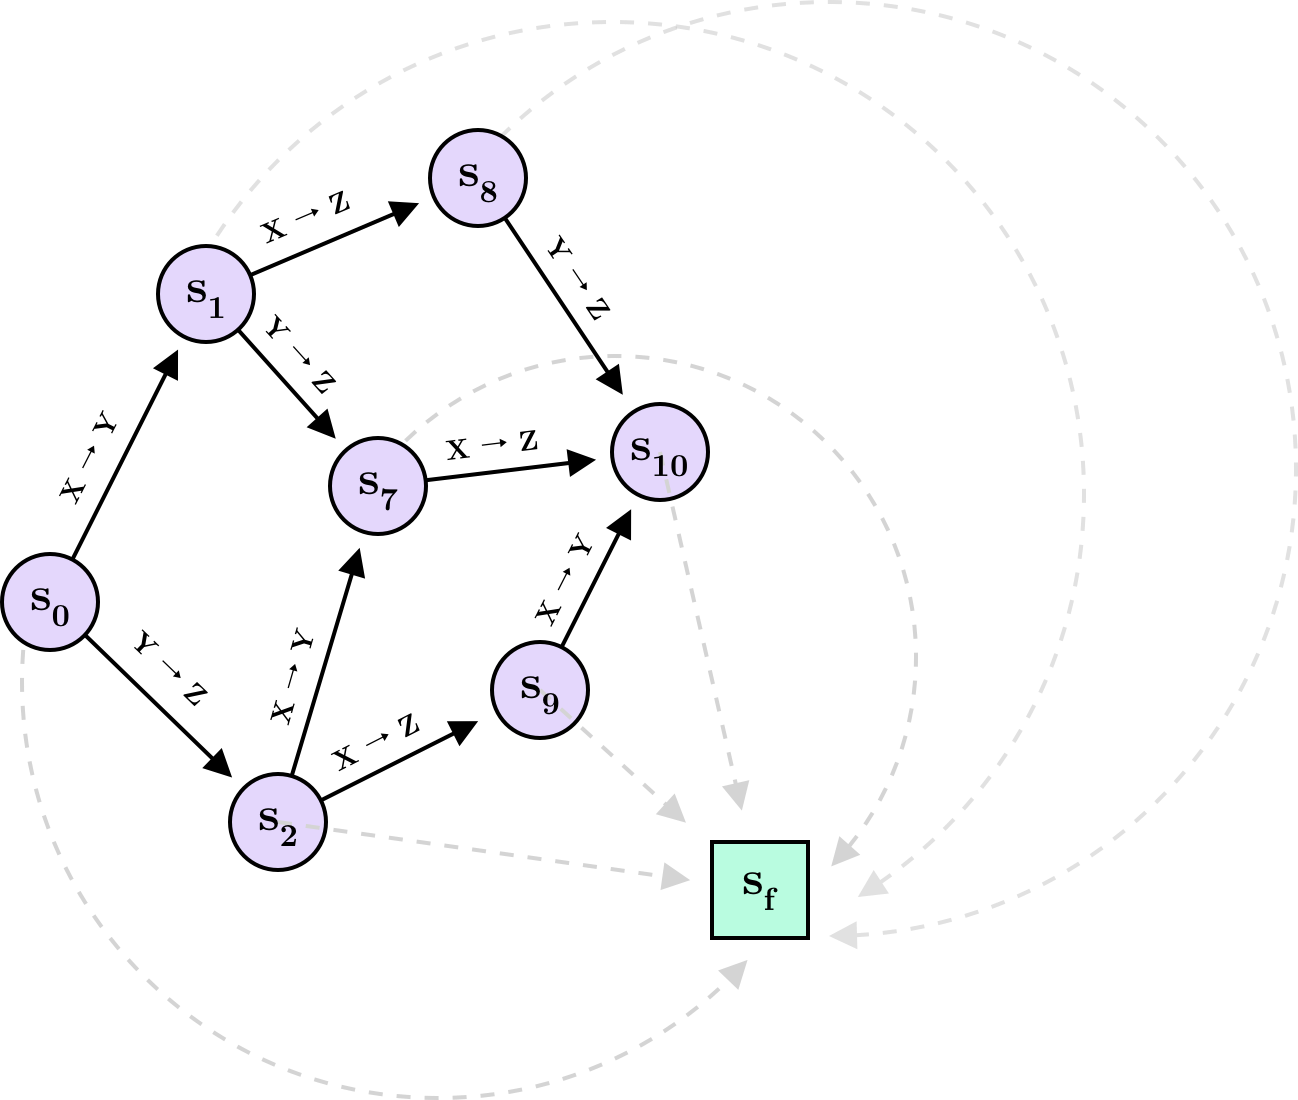 Transitions between states in a GFlowNet